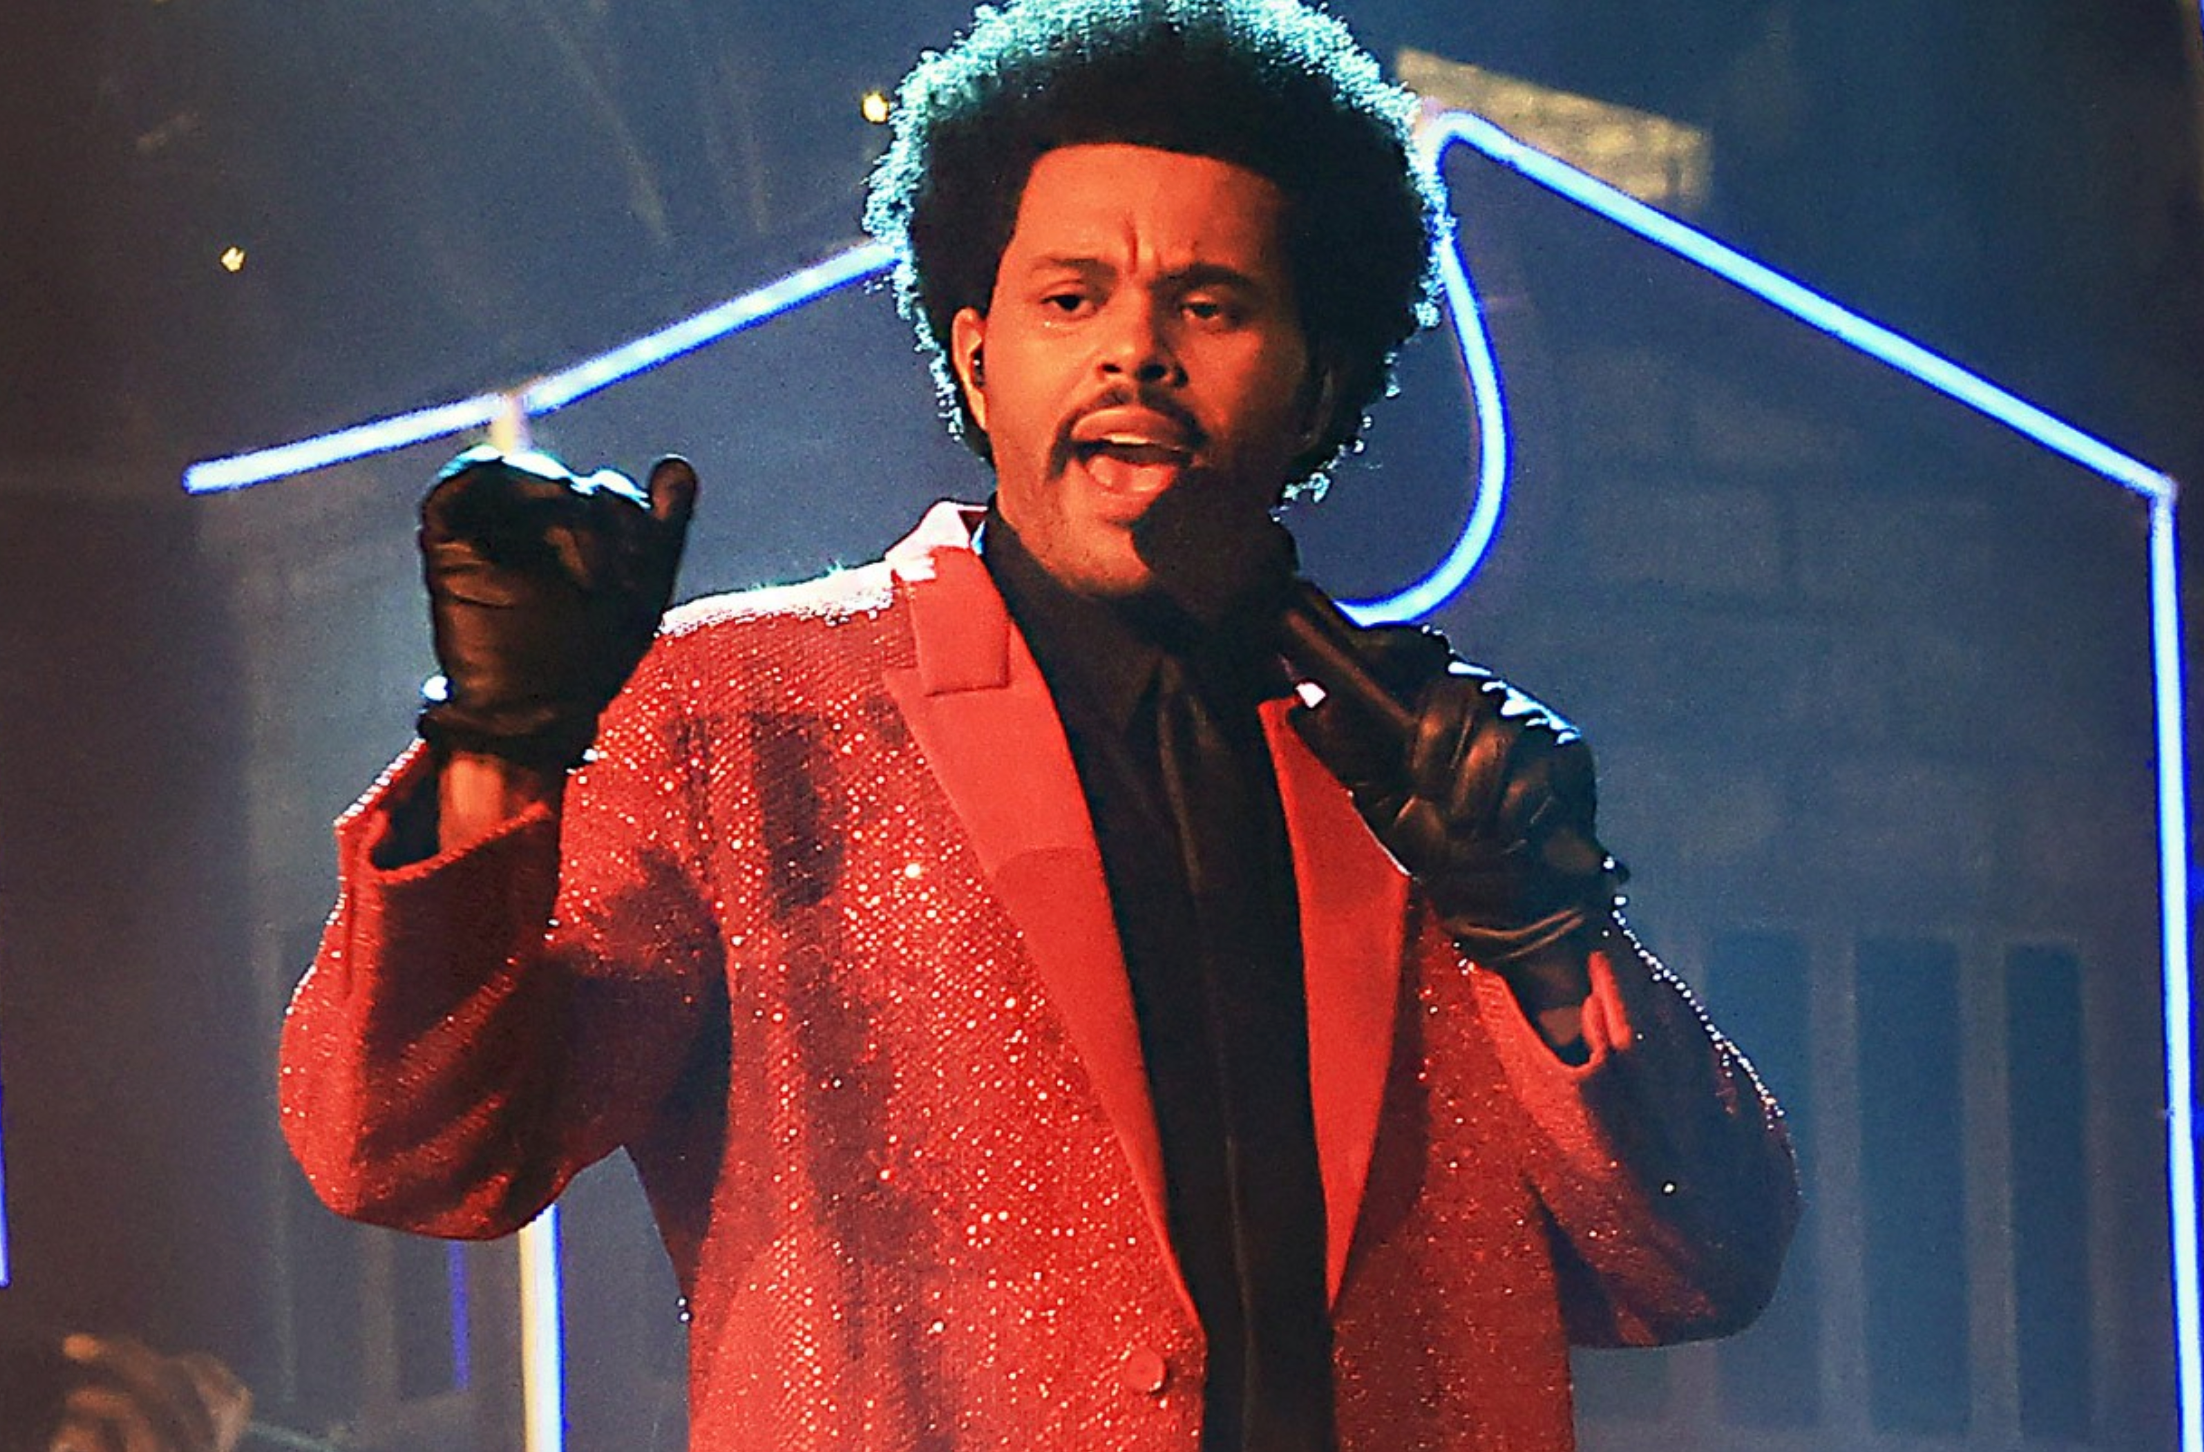 The Weeknd Partners With Binance for First 